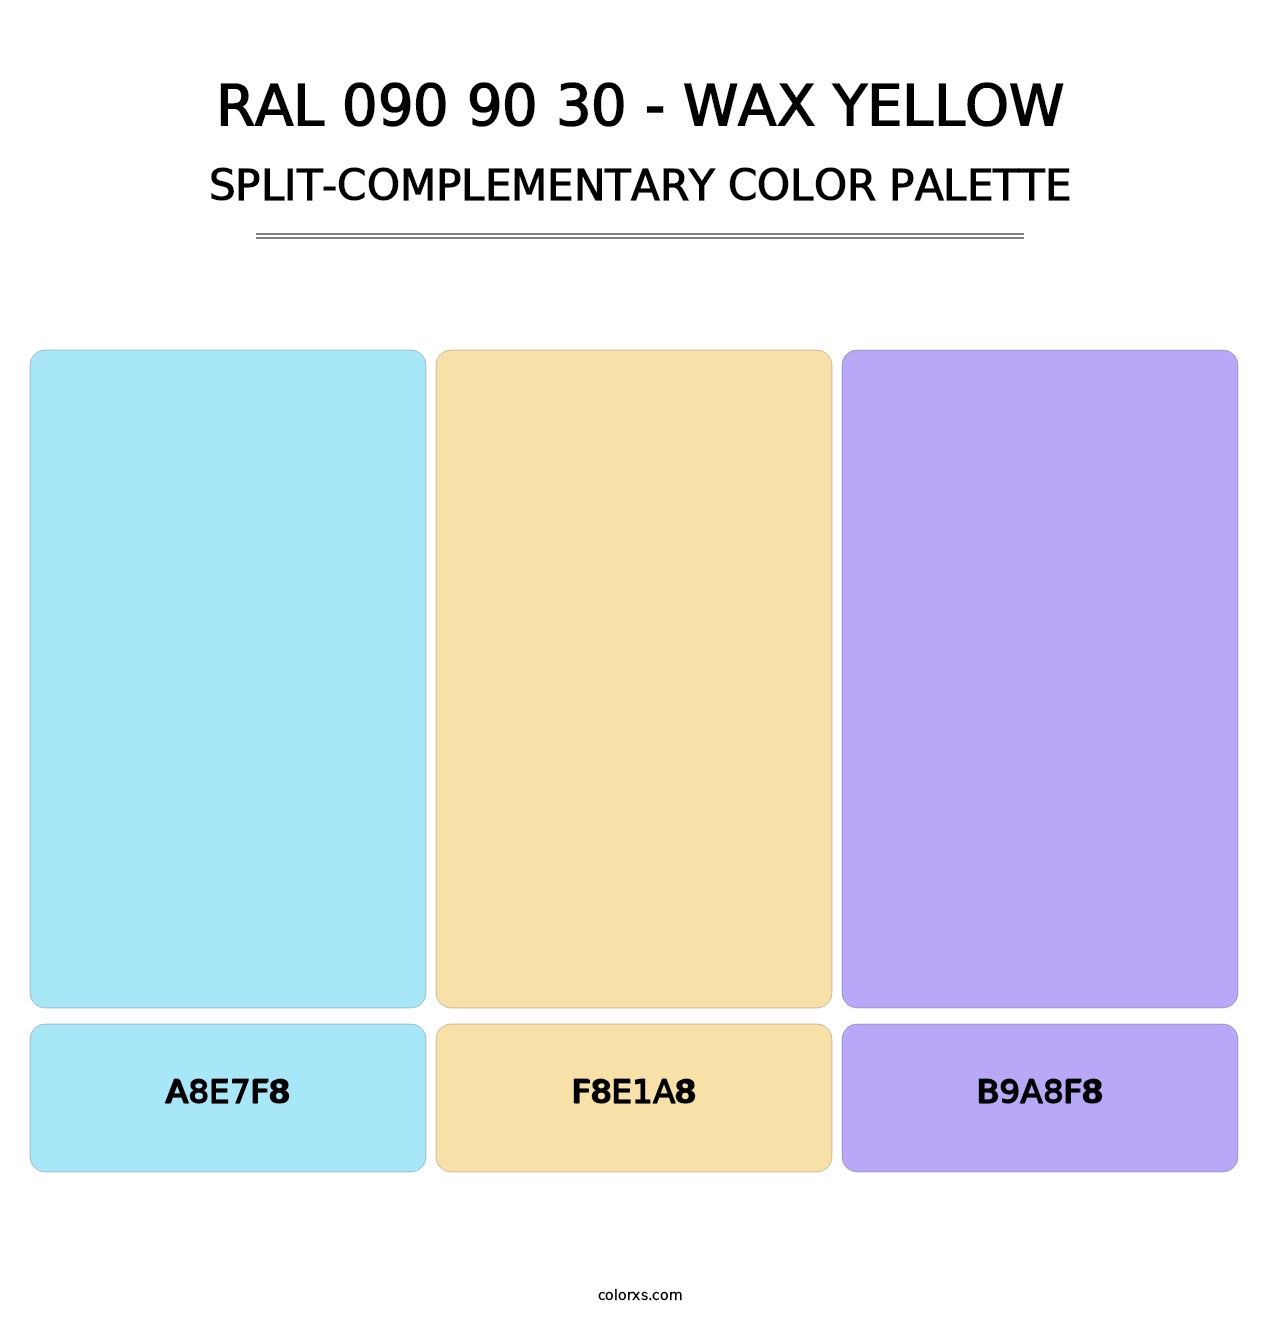 RAL 090 90 30 - Wax Yellow - Split-Complementary Color Palette